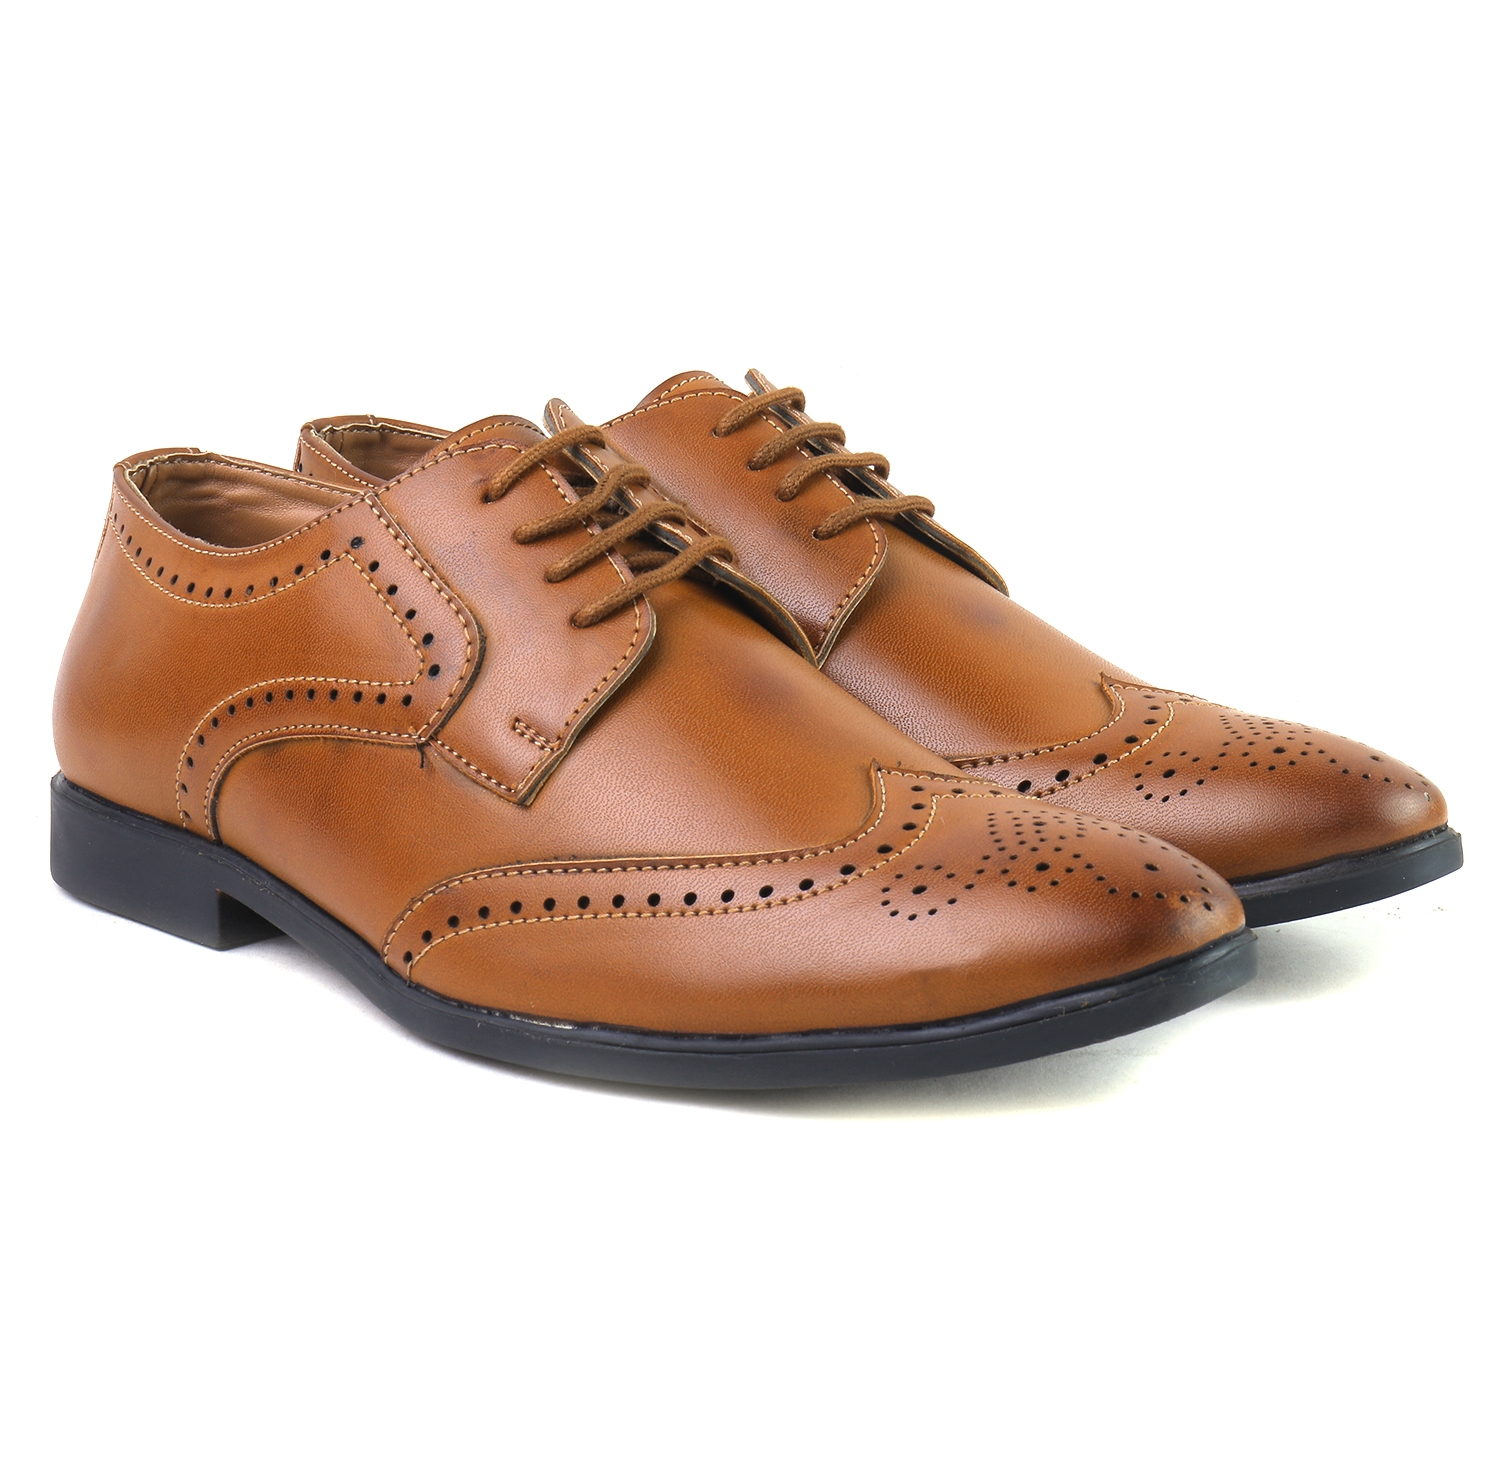 BRATVA | J10 1501 Mens Casual Office Corporate Evening Dress Brogue Shoes for Men in colour Black|Brown|Tan|Cherry 0